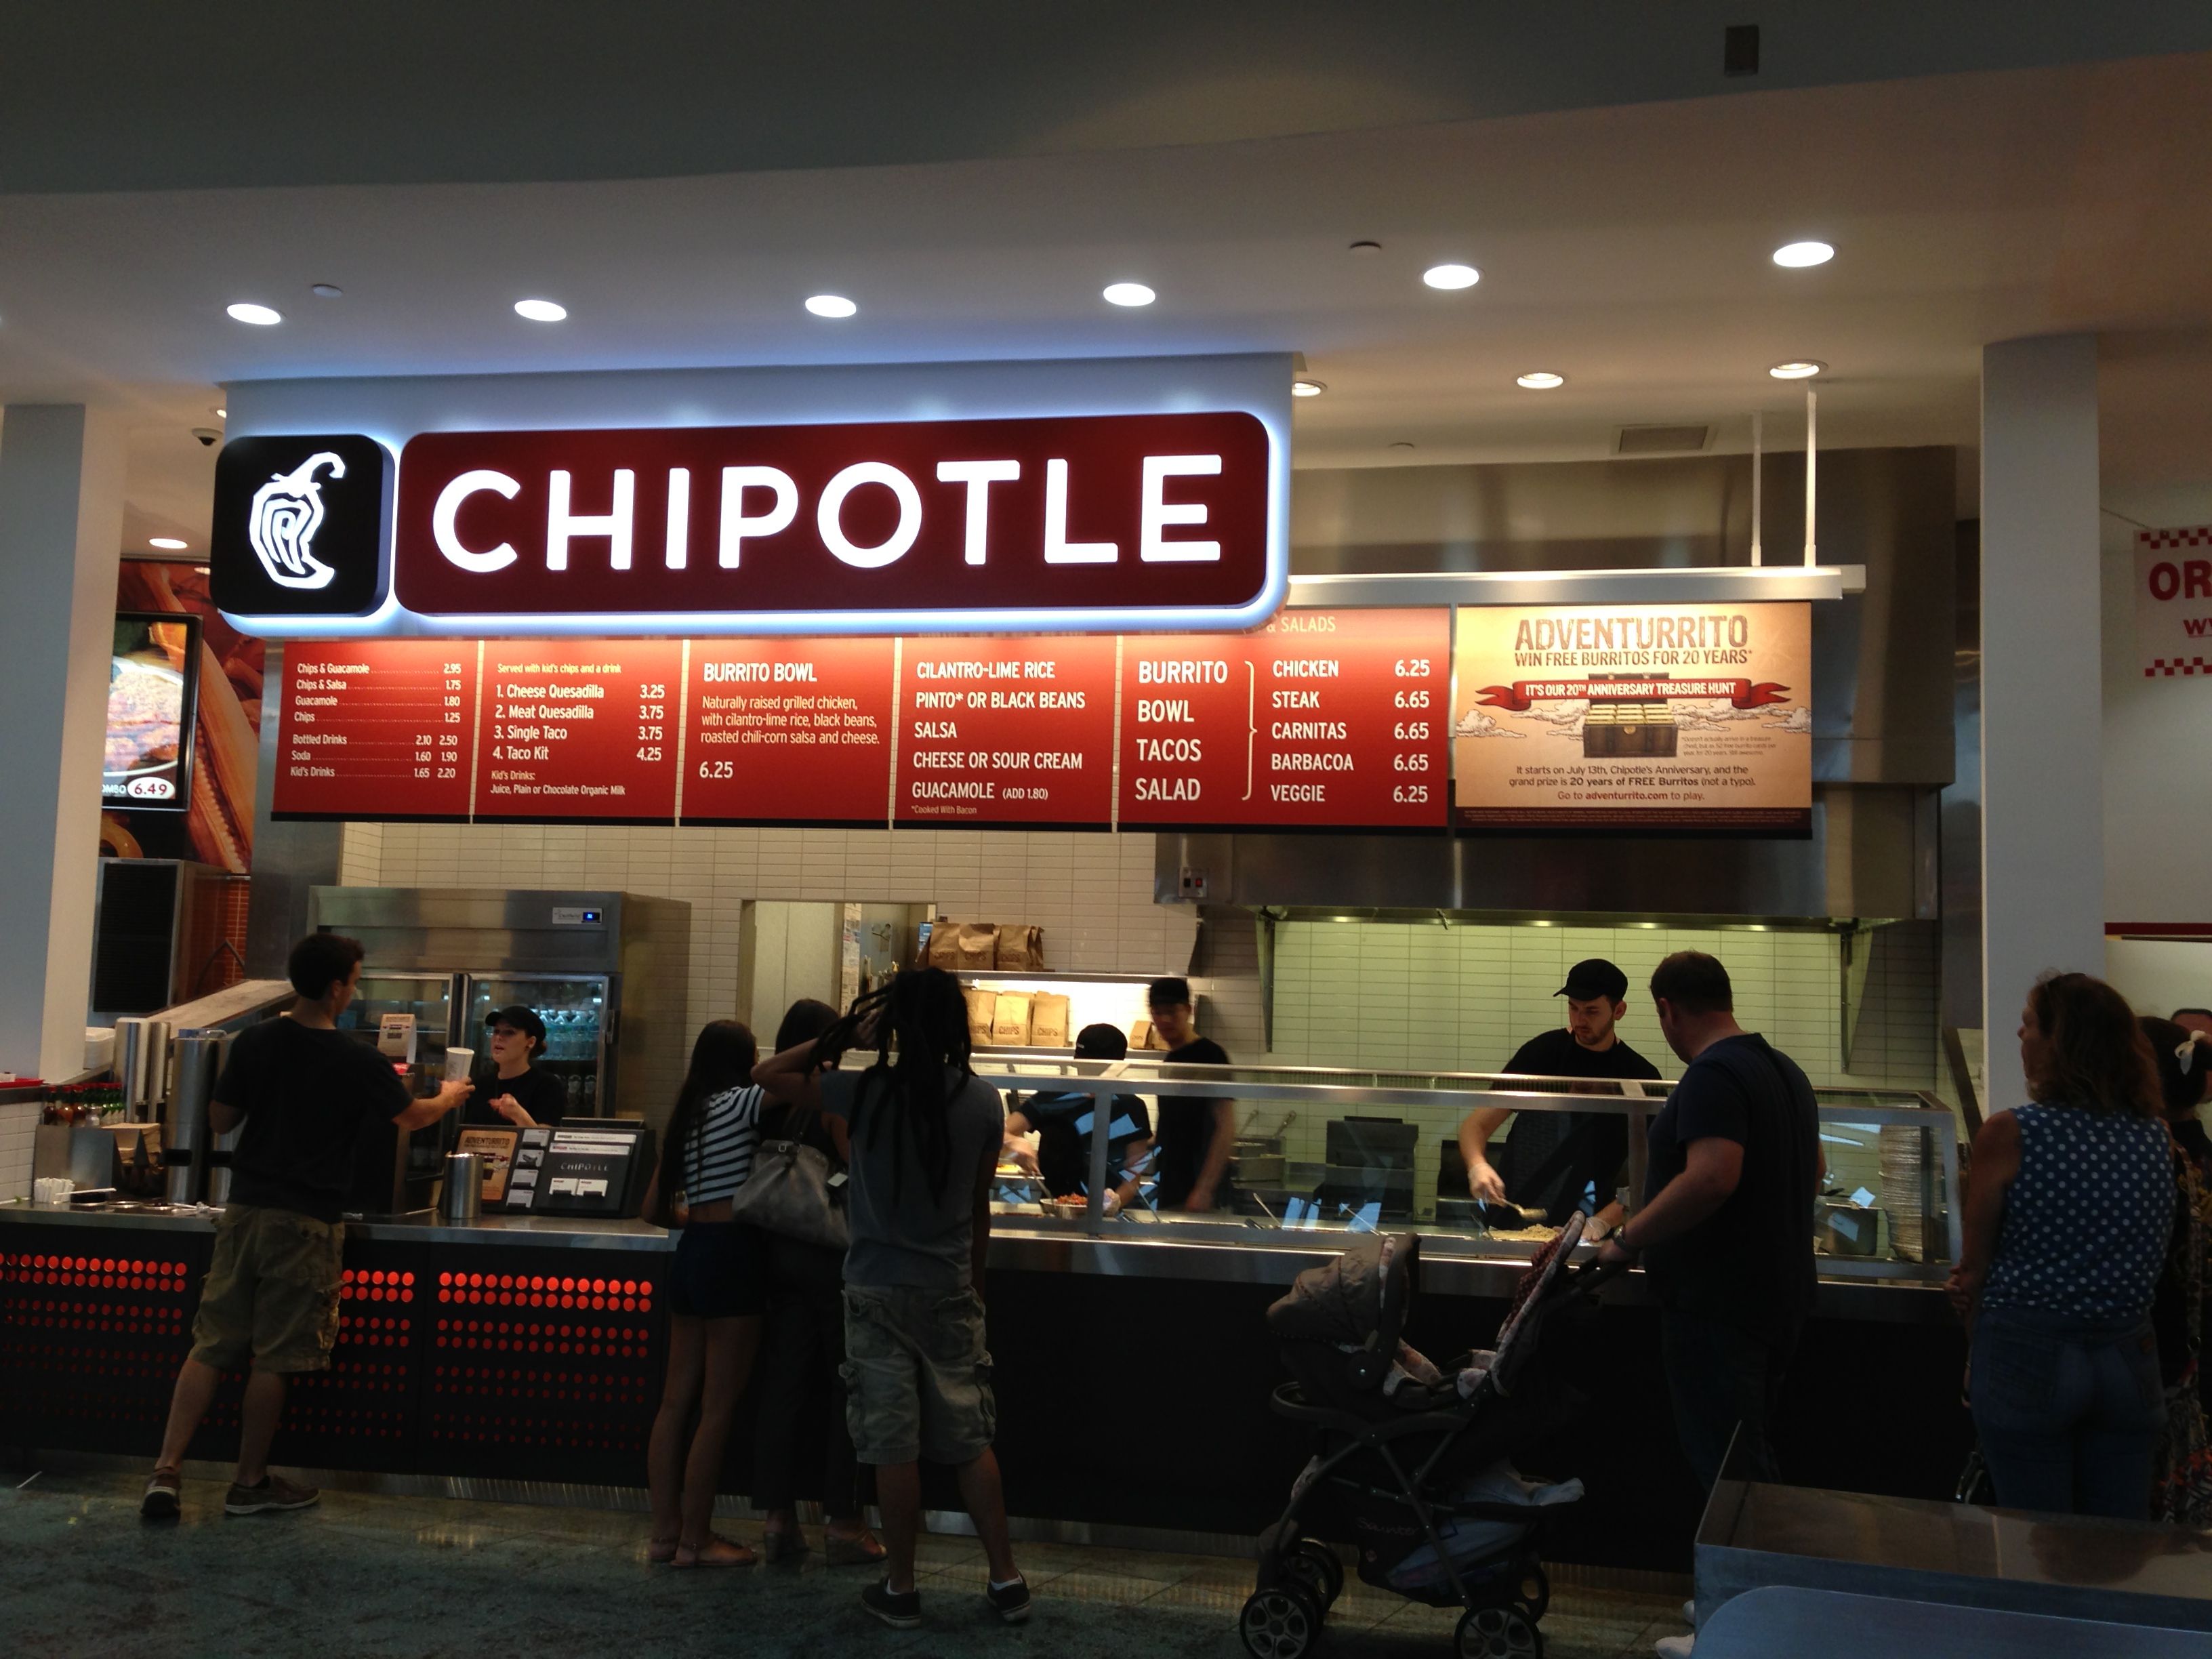 Chipotle shuts down Boston restaurant for cleaning – good news or bad news?